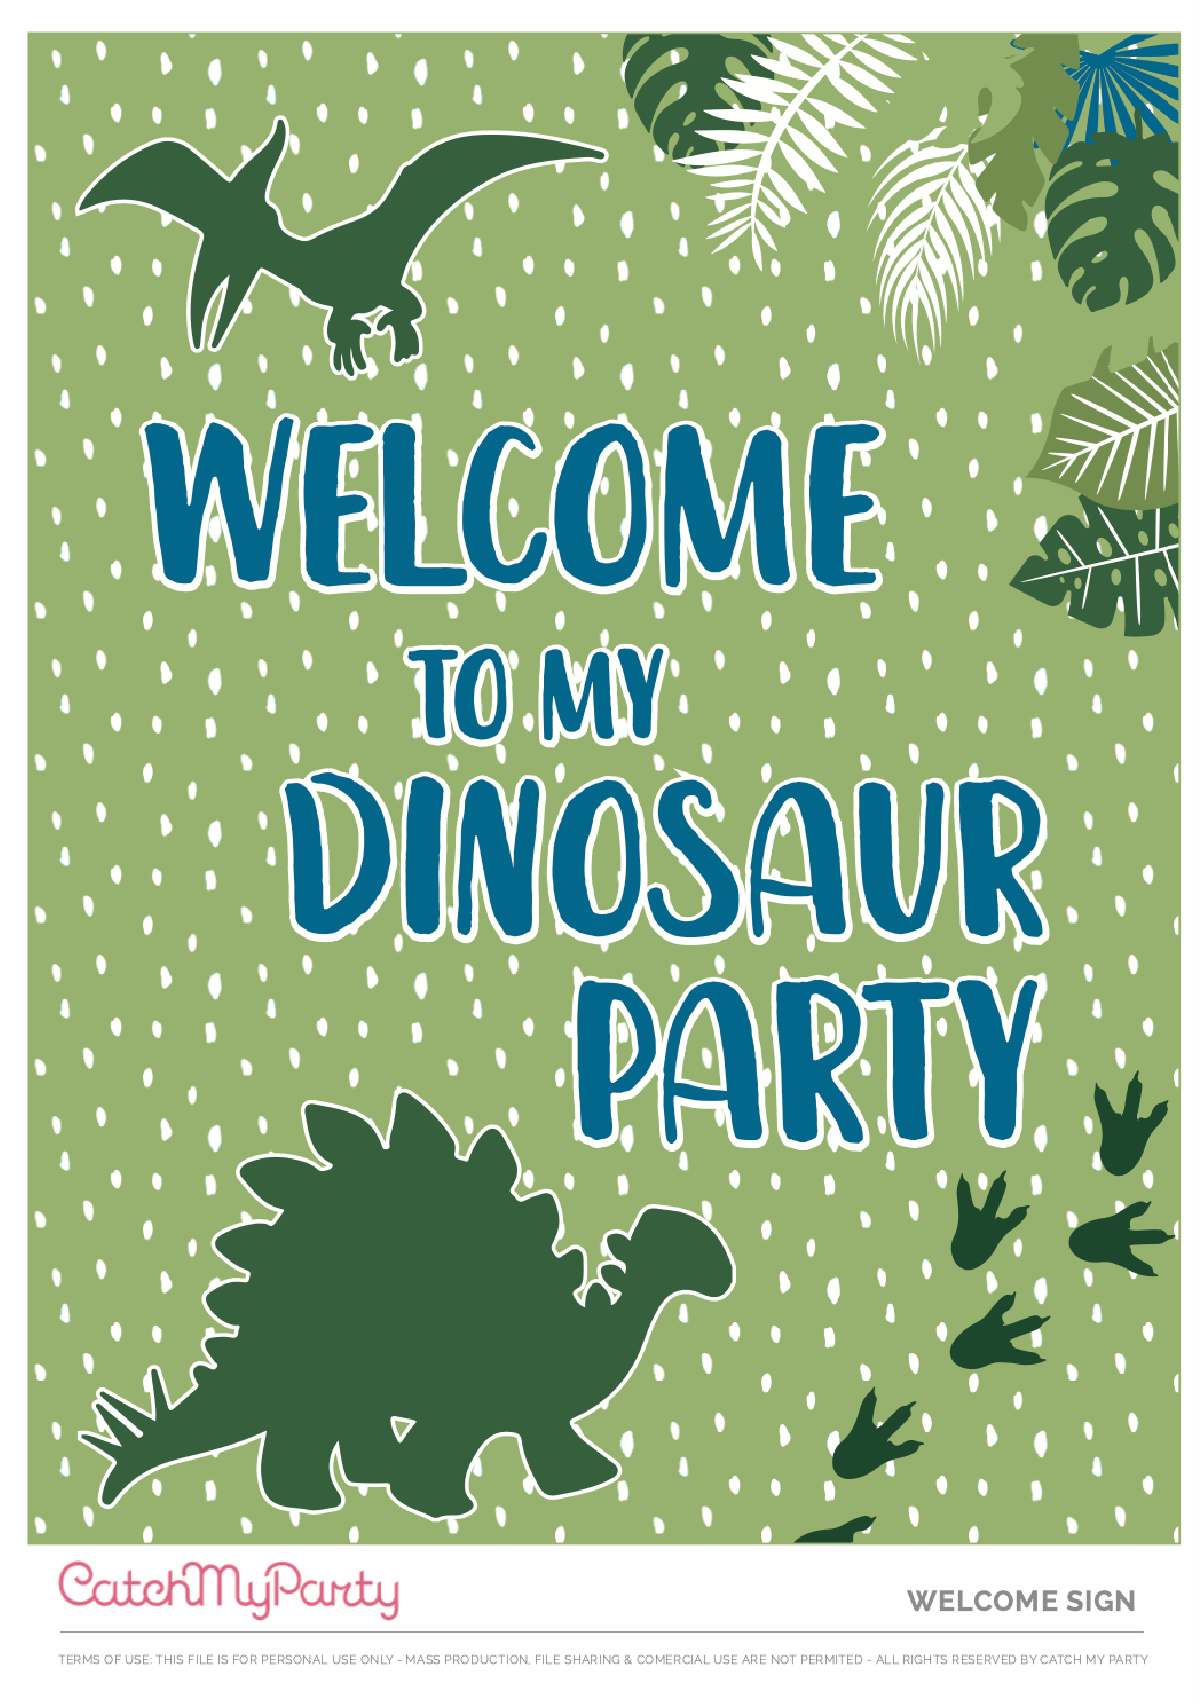 Download These Free Dinosaur Party Printables, Now - Welcome Poster